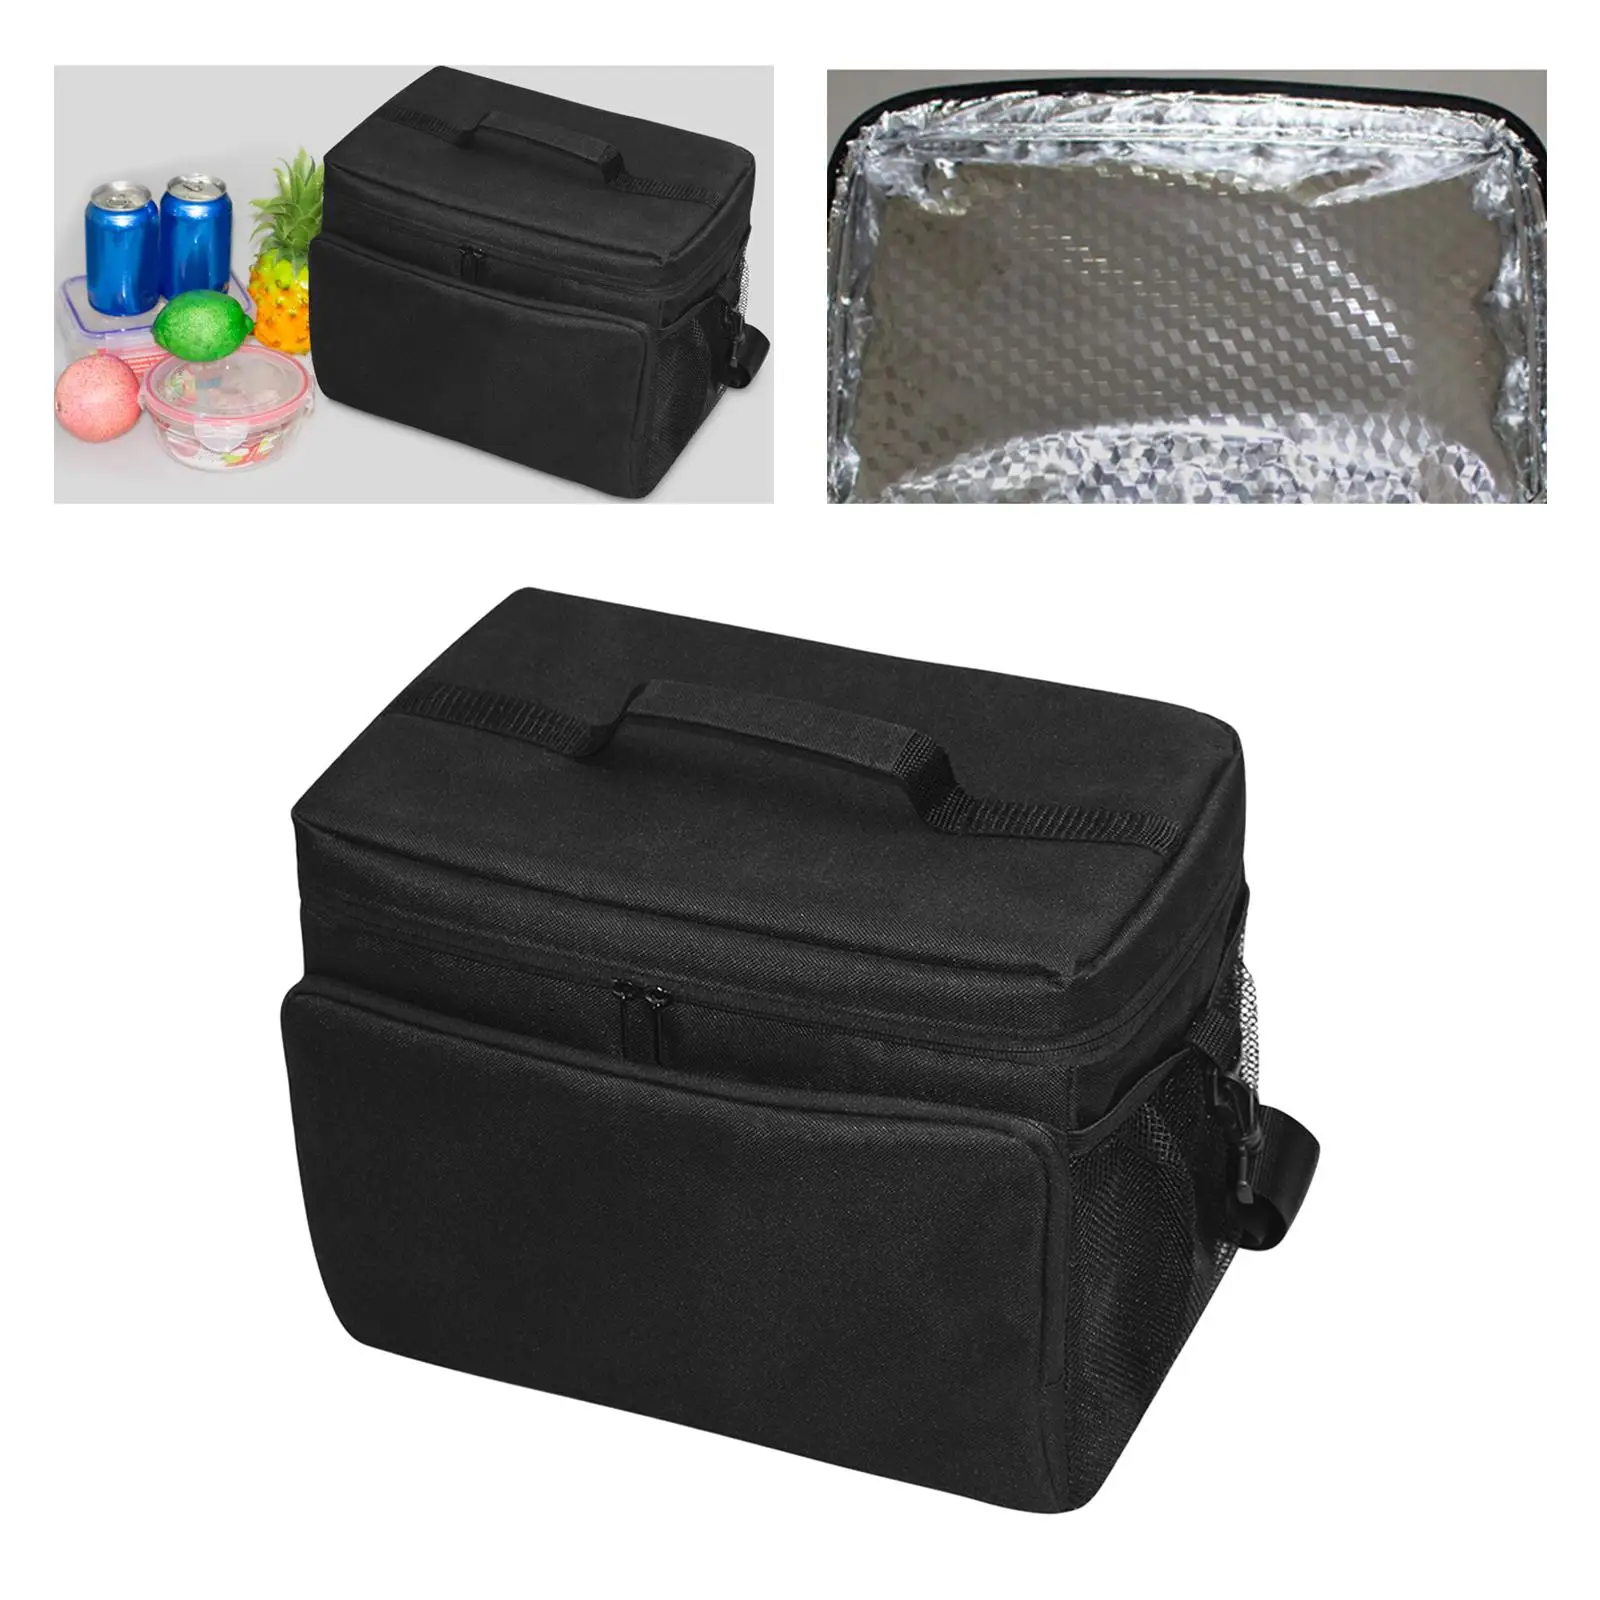 Insulated Bag Large Capacity Cooler Bag Food Container for Picnic Travel BBQ